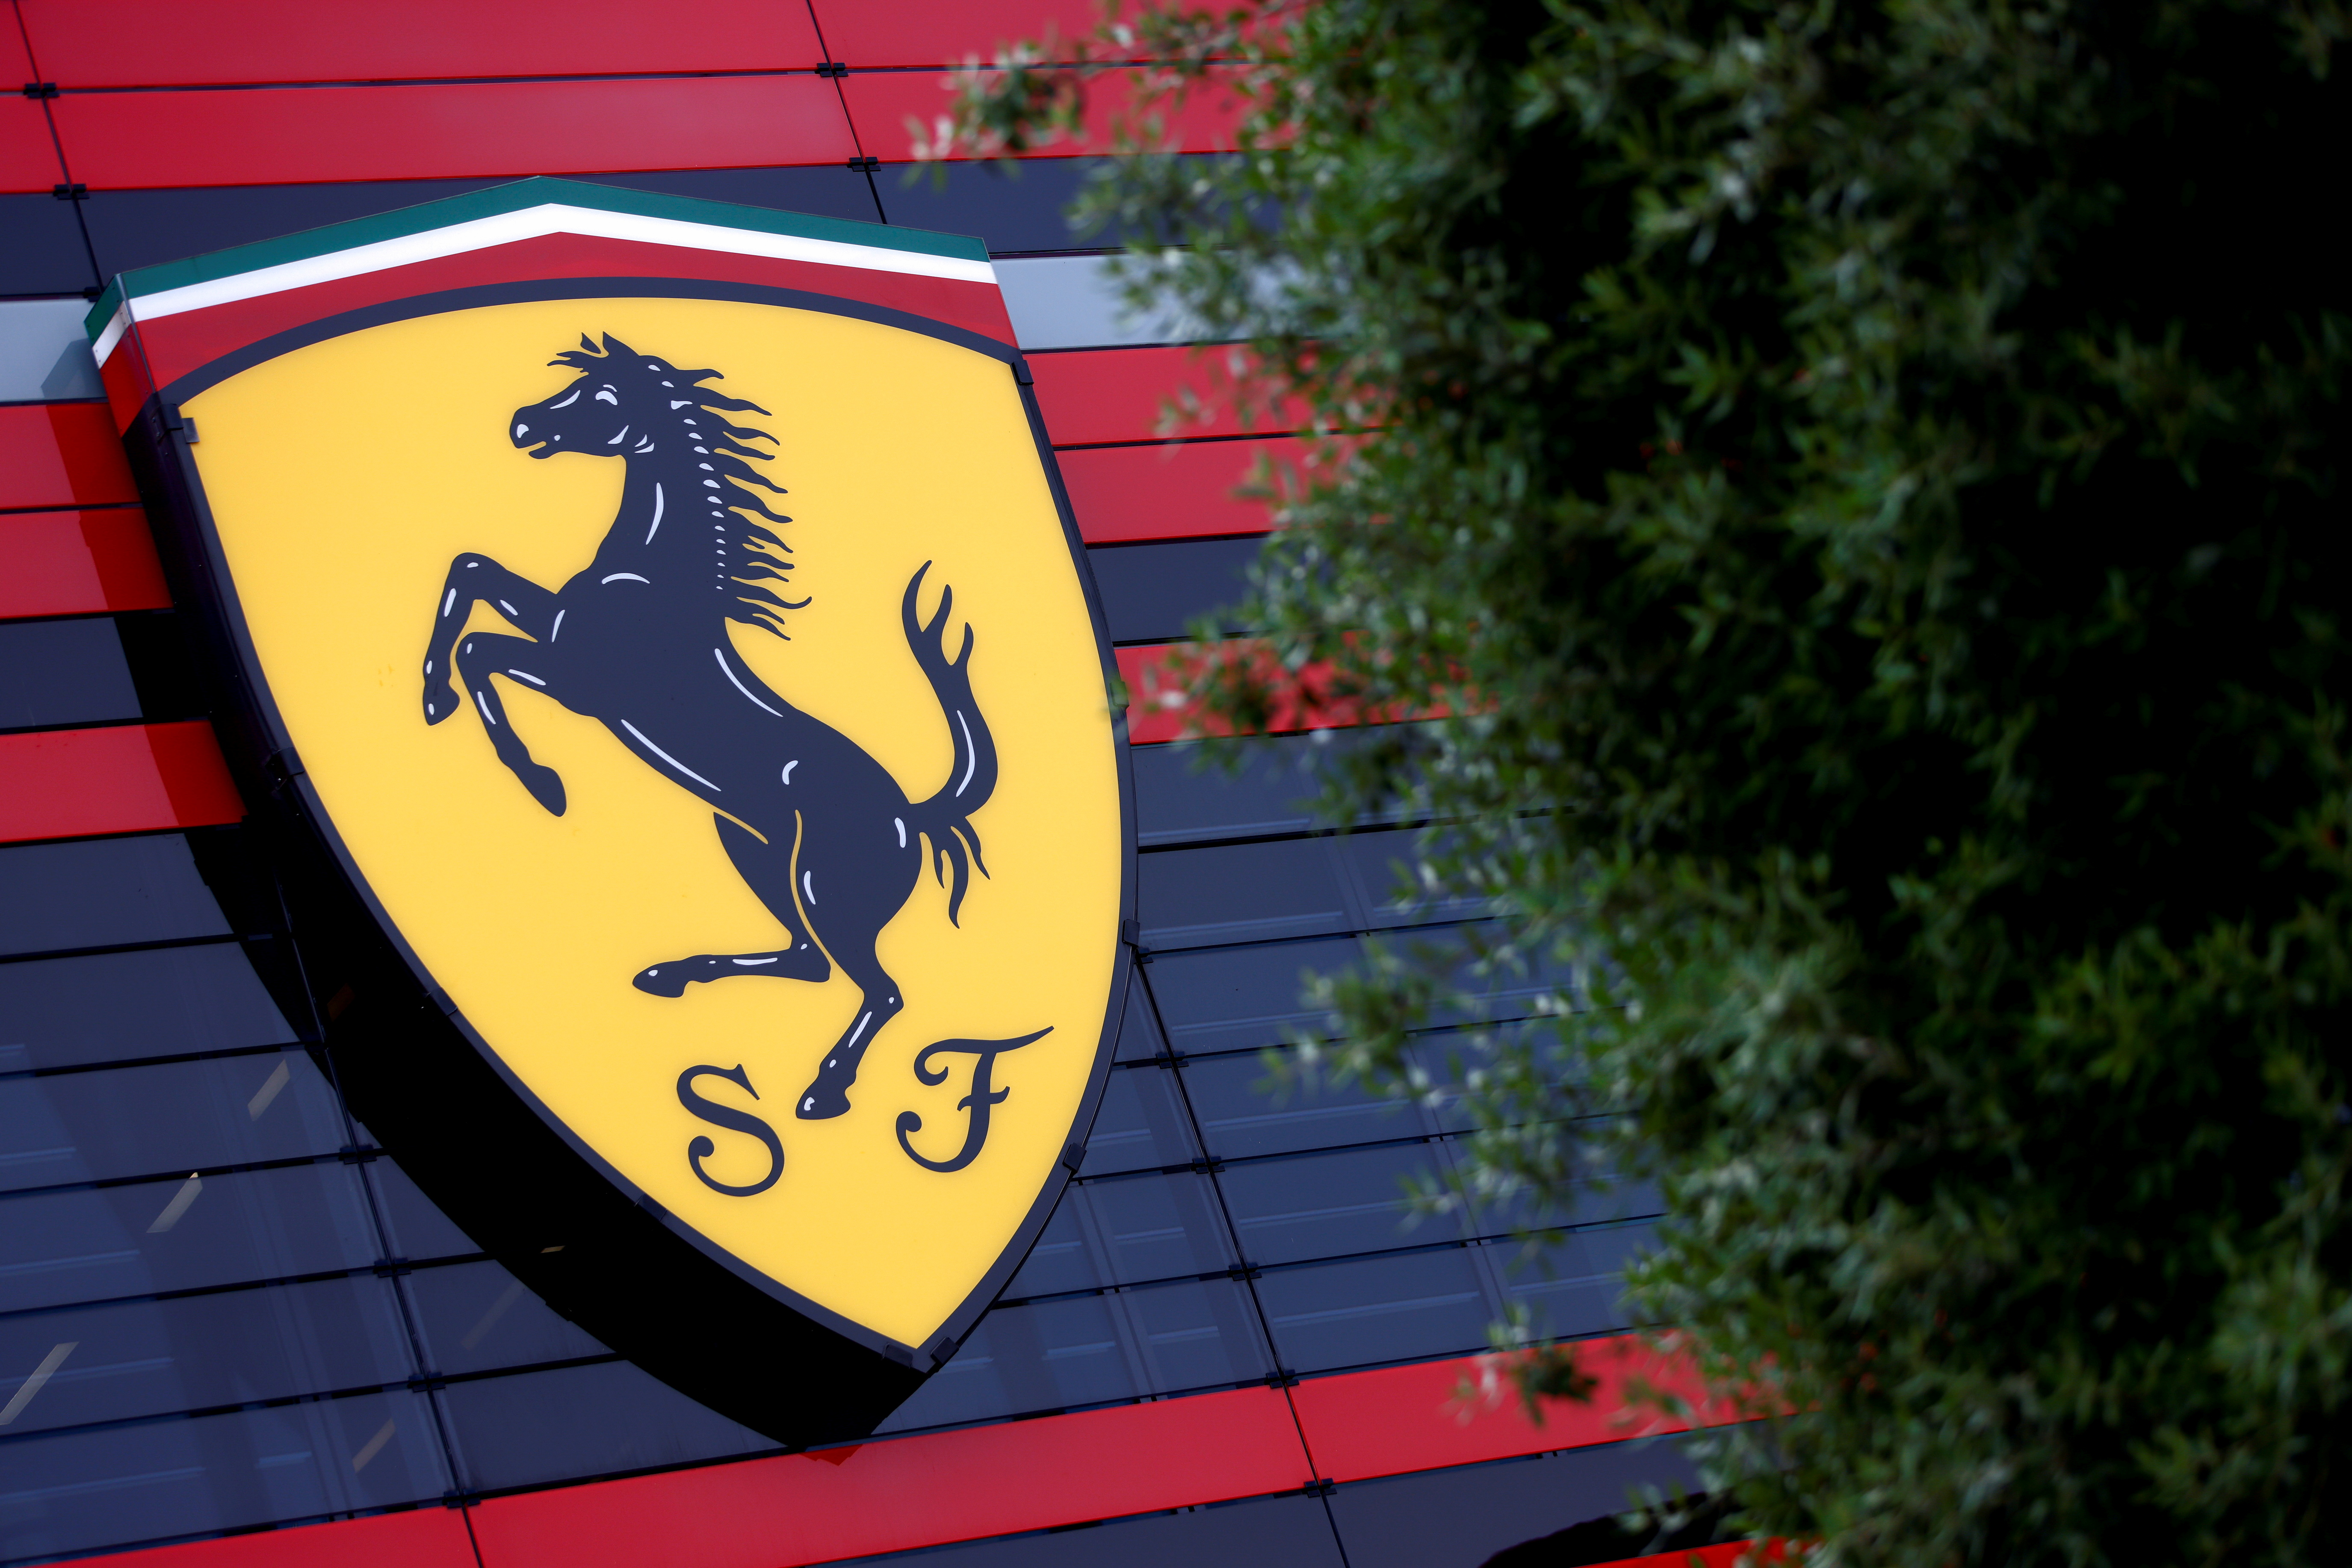 Ferrari reboots its effort to profit from fashion and fine dining